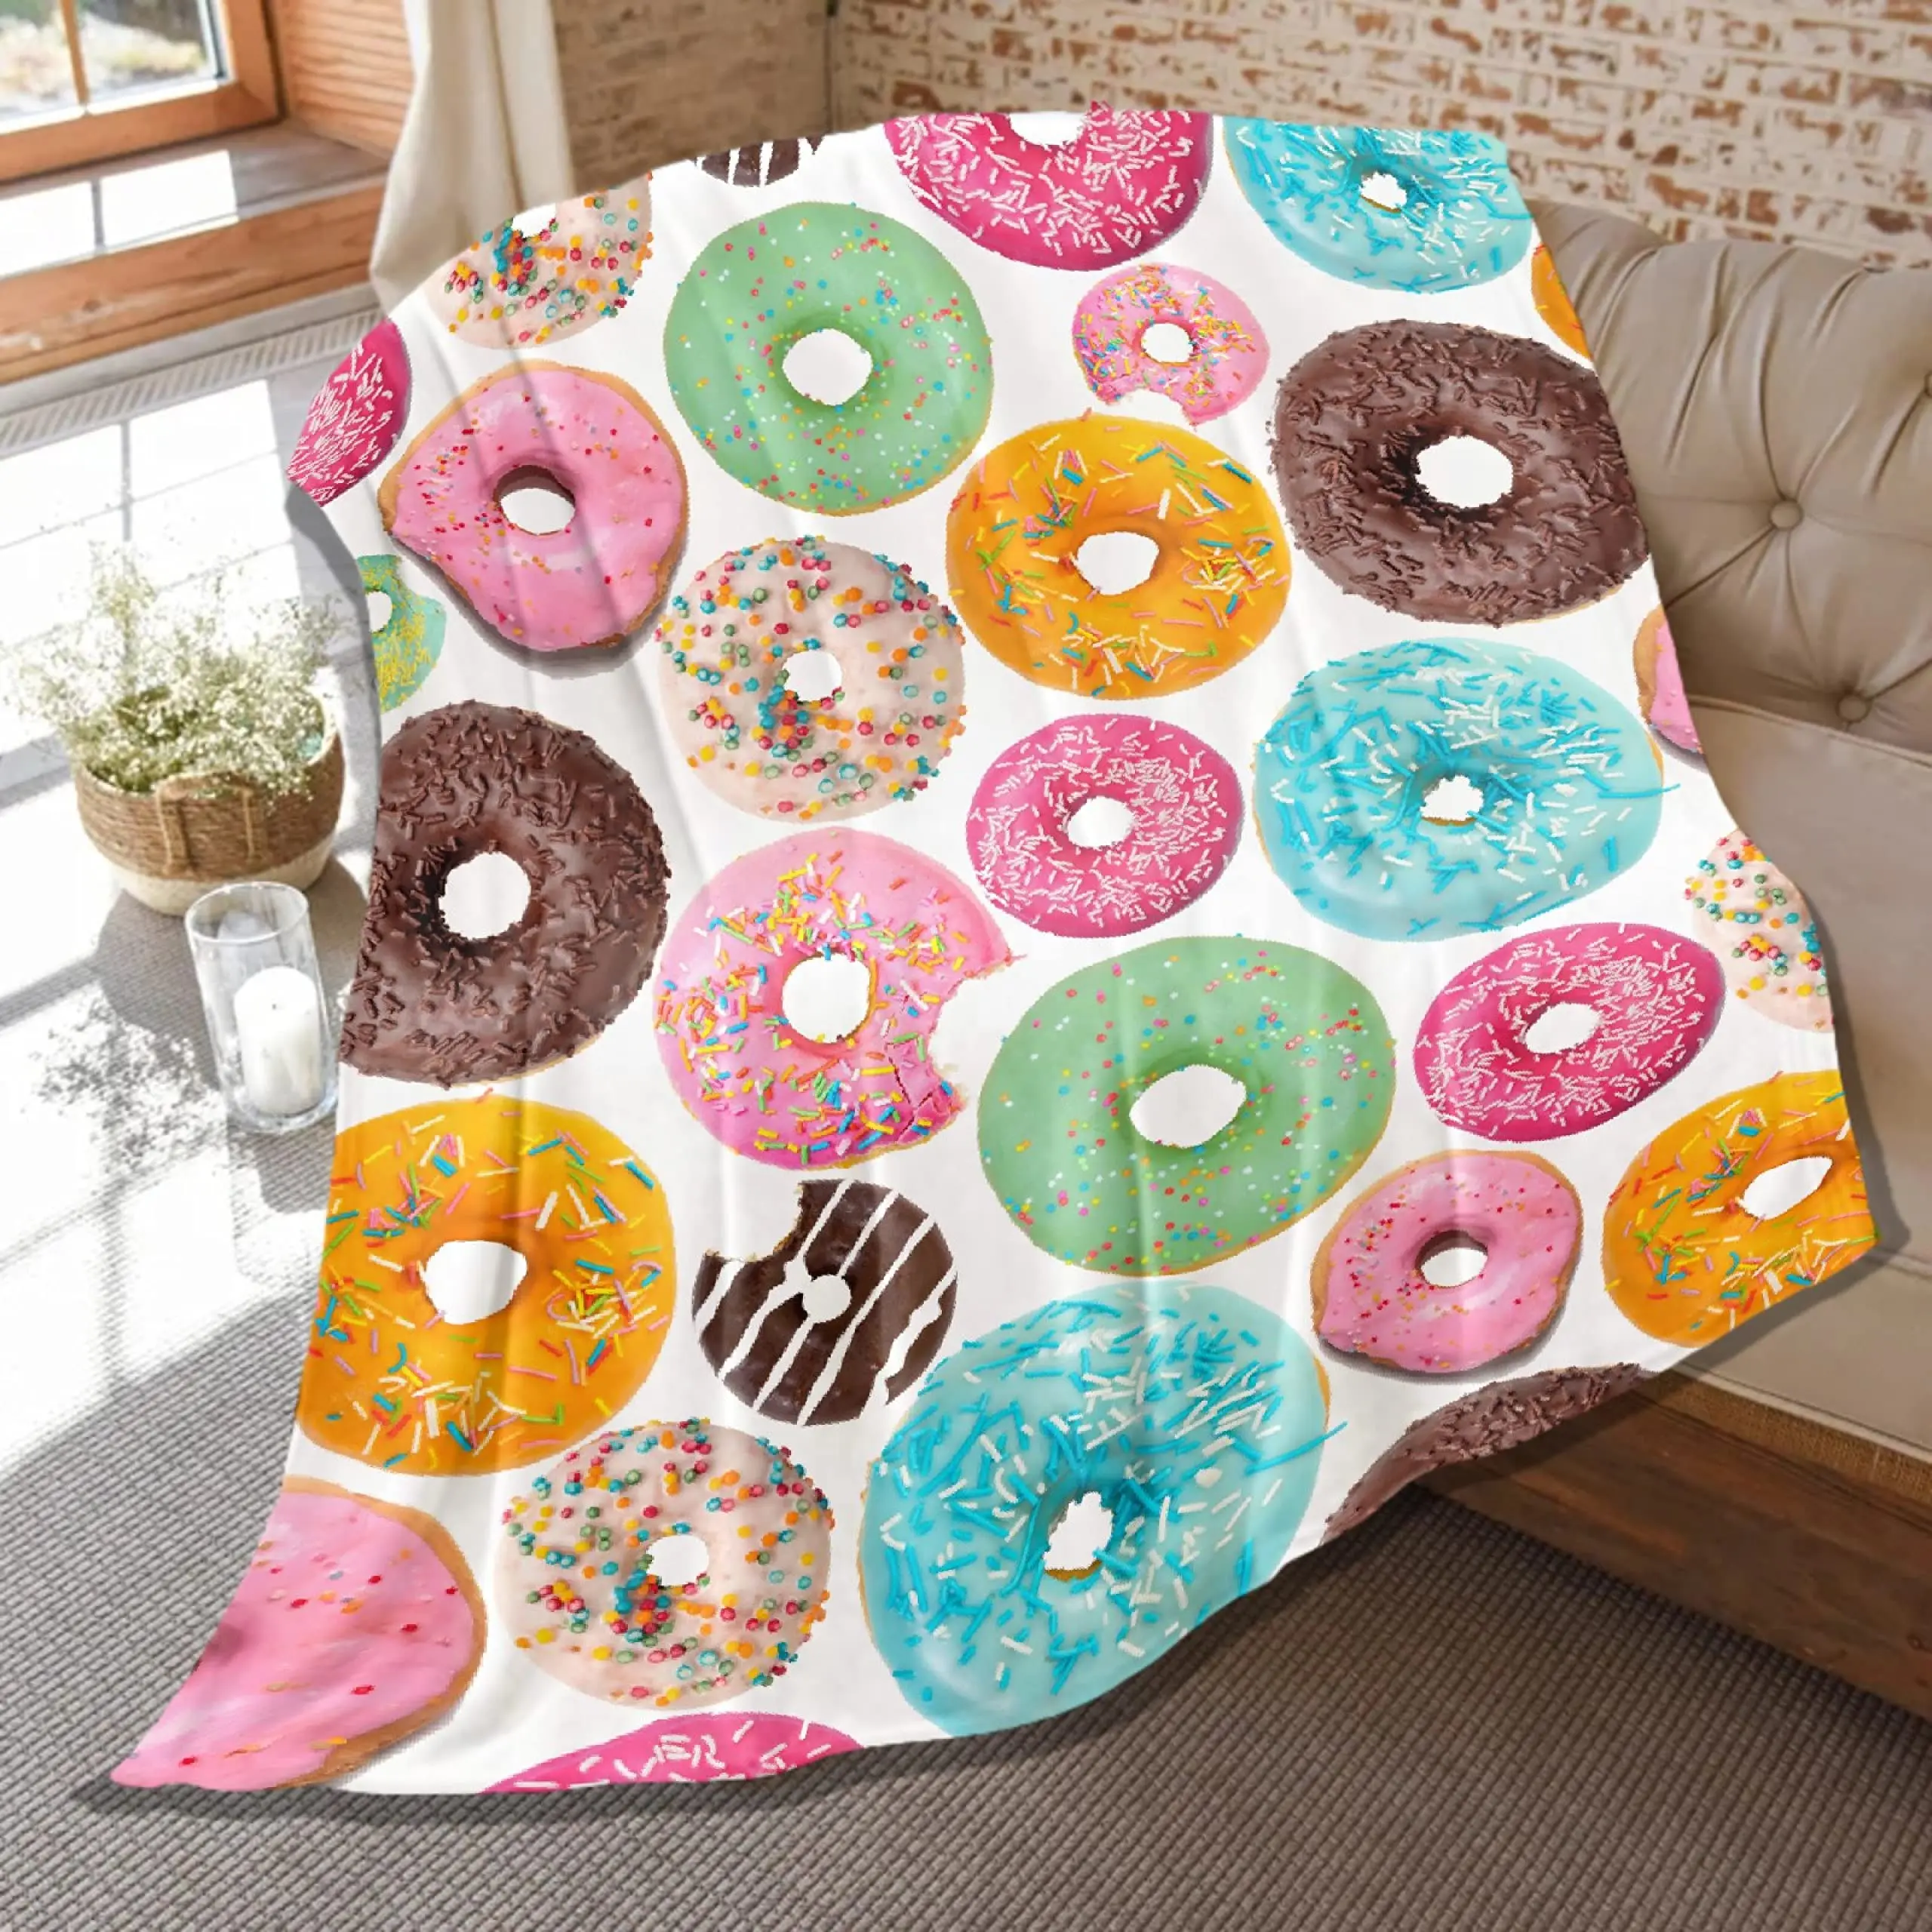 

Women Men Soft Food Blanket Pizza Noodles Lightweight Plush Flannel Quilt for Beach Couch Bed Sofa Throw Blanket Birthday Gift